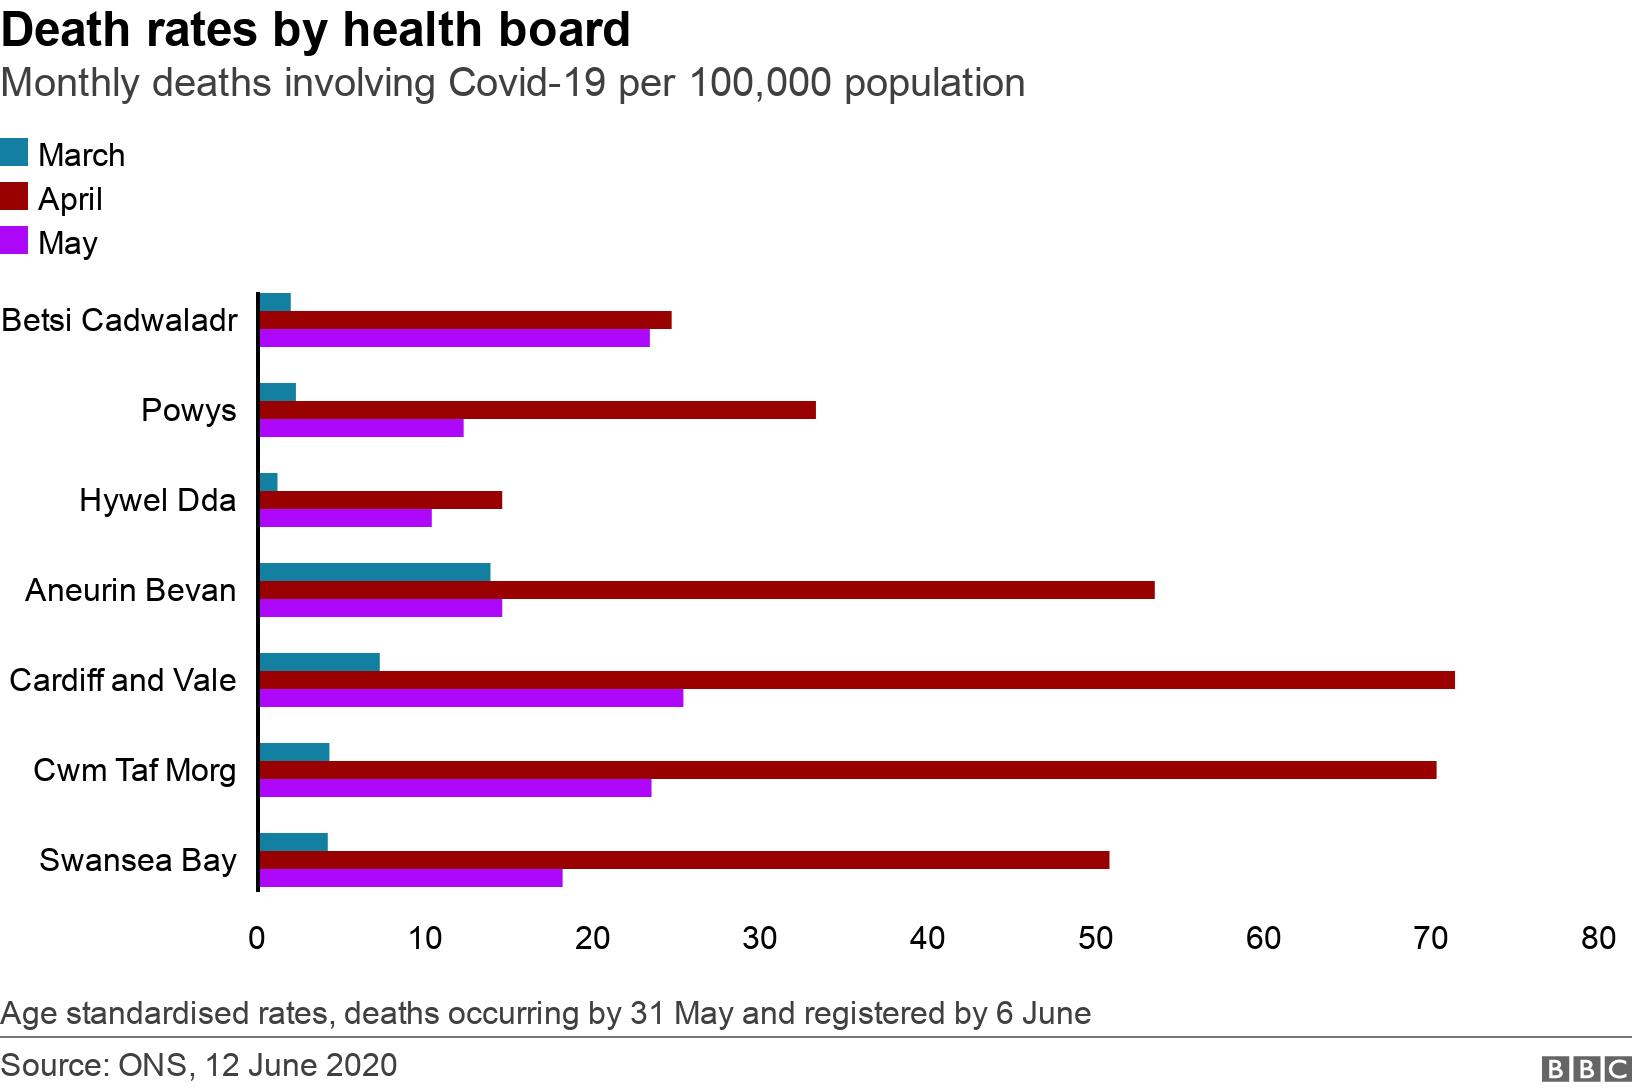 Death rates by health board. Monthly deaths involving Covid-19 per 100,000 population.  Age standardised rates, deaths occurring by 31 May and registered by 6 June.